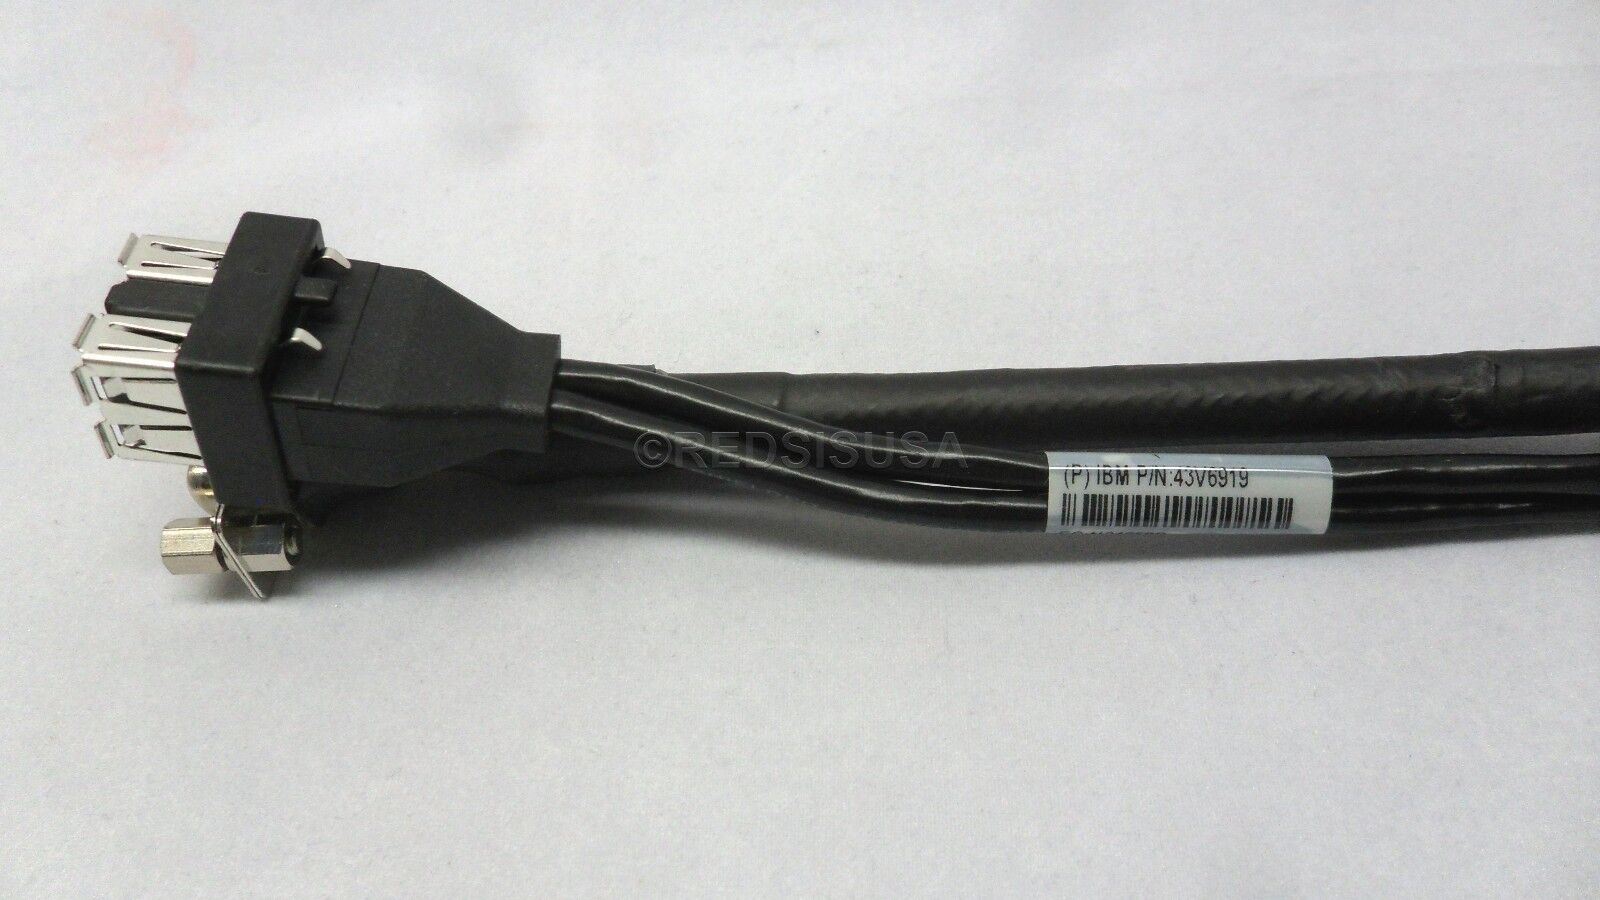 IBM USB and Video cable for IBM X3550 43V6919